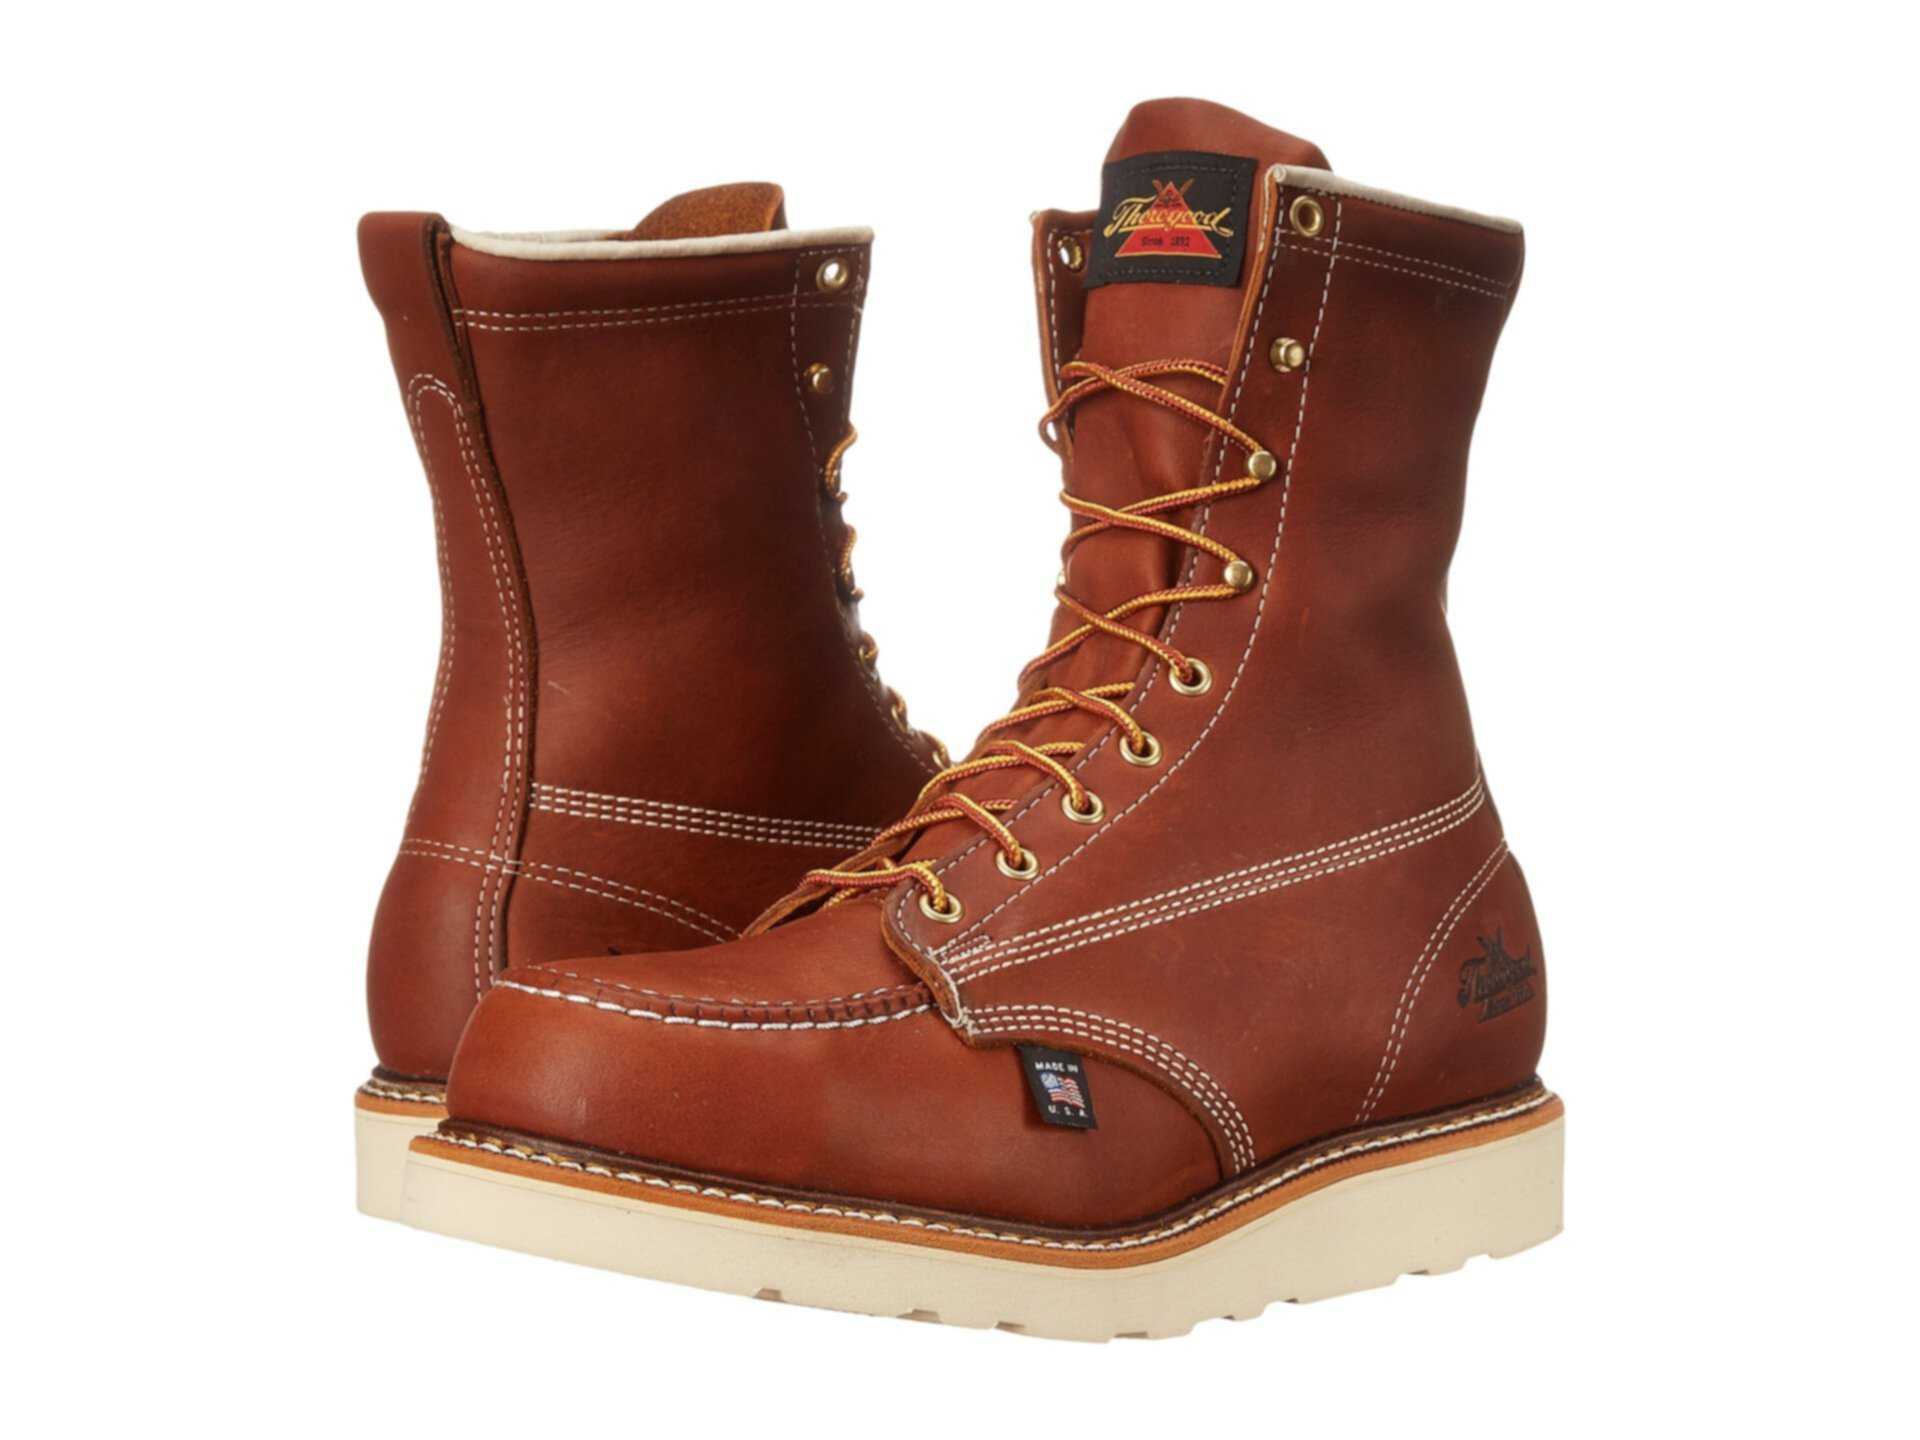 Red wing moc toe review, 3 years old – do the boots hold up?